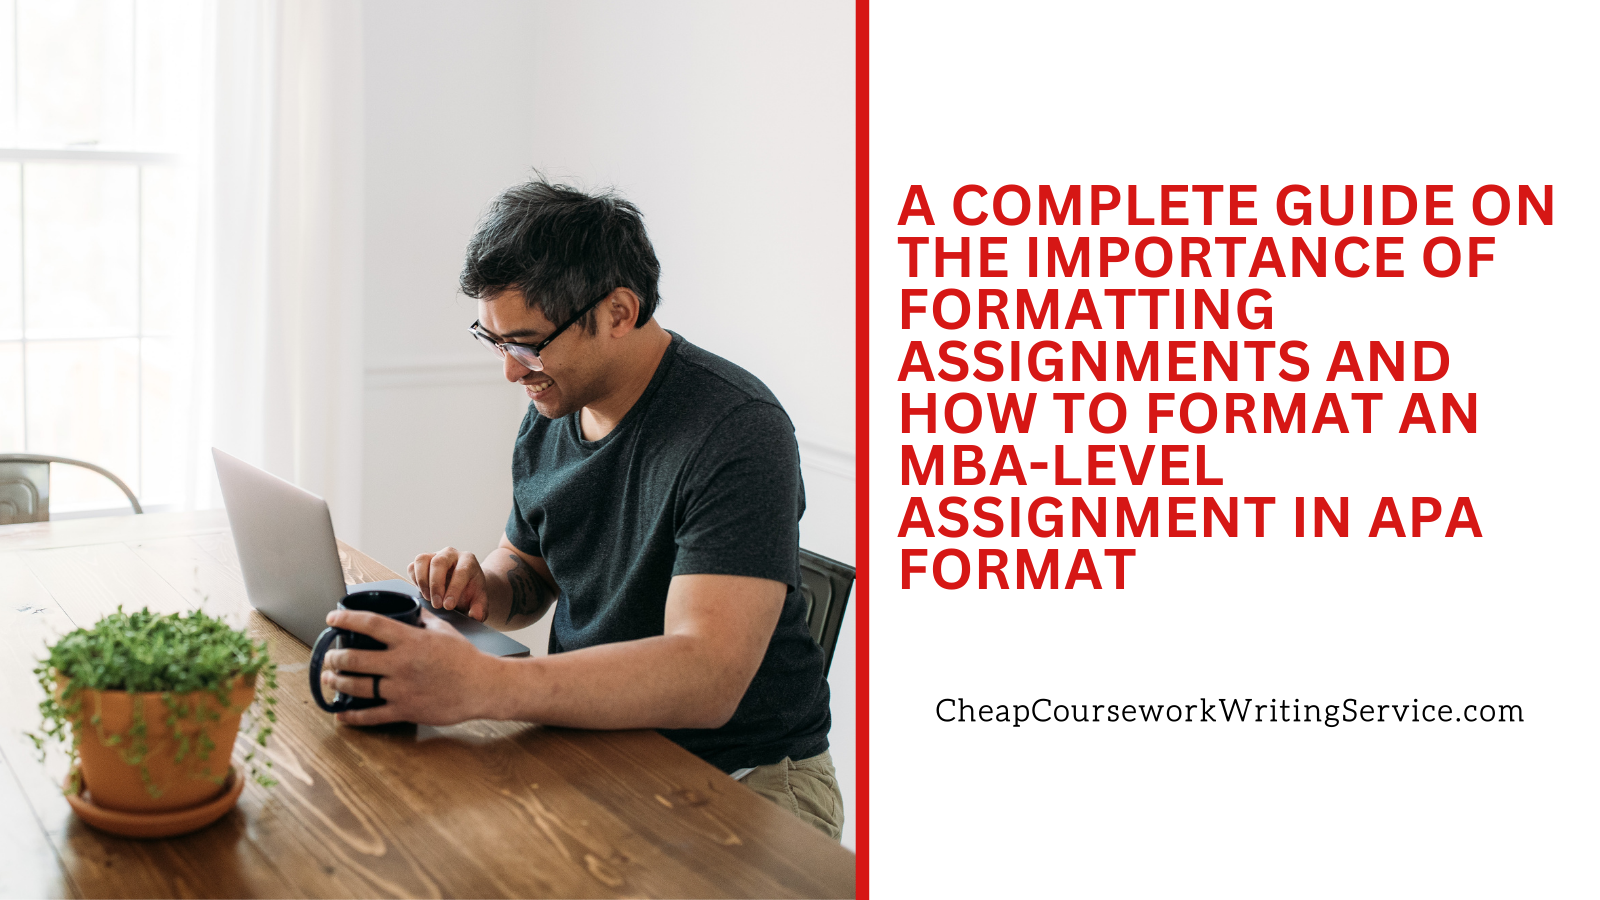 A Complete Guide on the Importance of Formatting Assignments and How to Format an MBA-level Assignment in APA Format